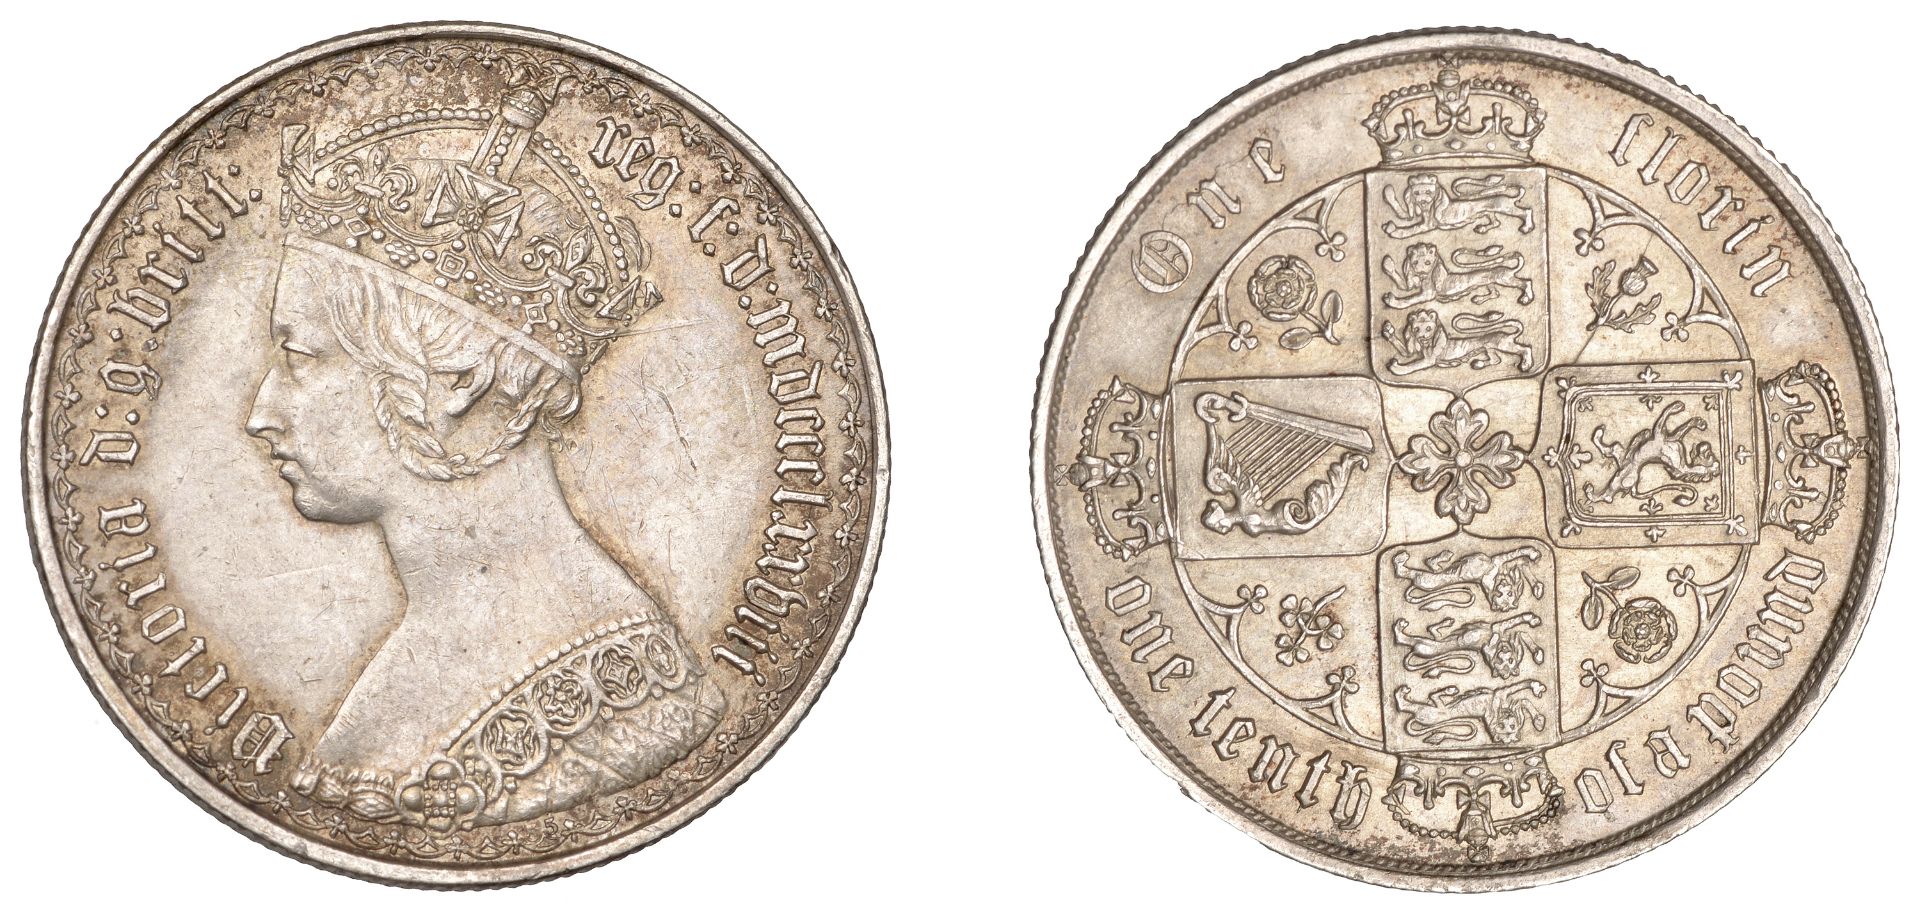 Victoria (1837-1901), Florin, 1878, die 55 (ESC 2889; S 3895). Nearly extremely fine Â£120-Â£...